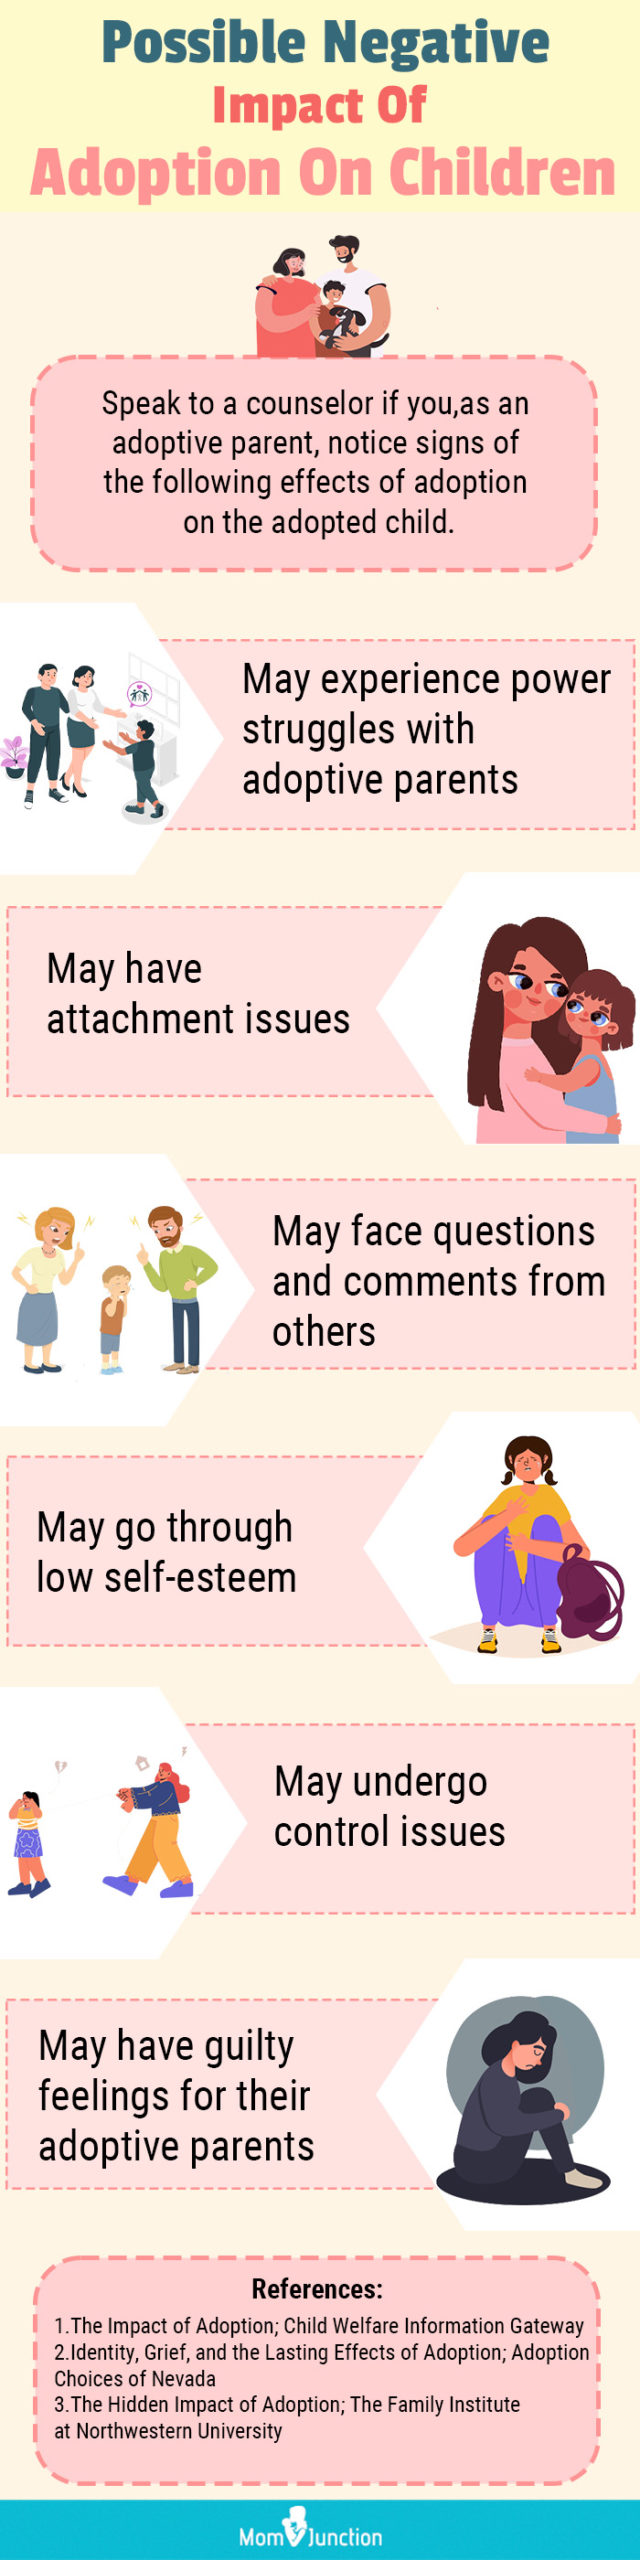 possible negative impact of adoption on children (infographic)